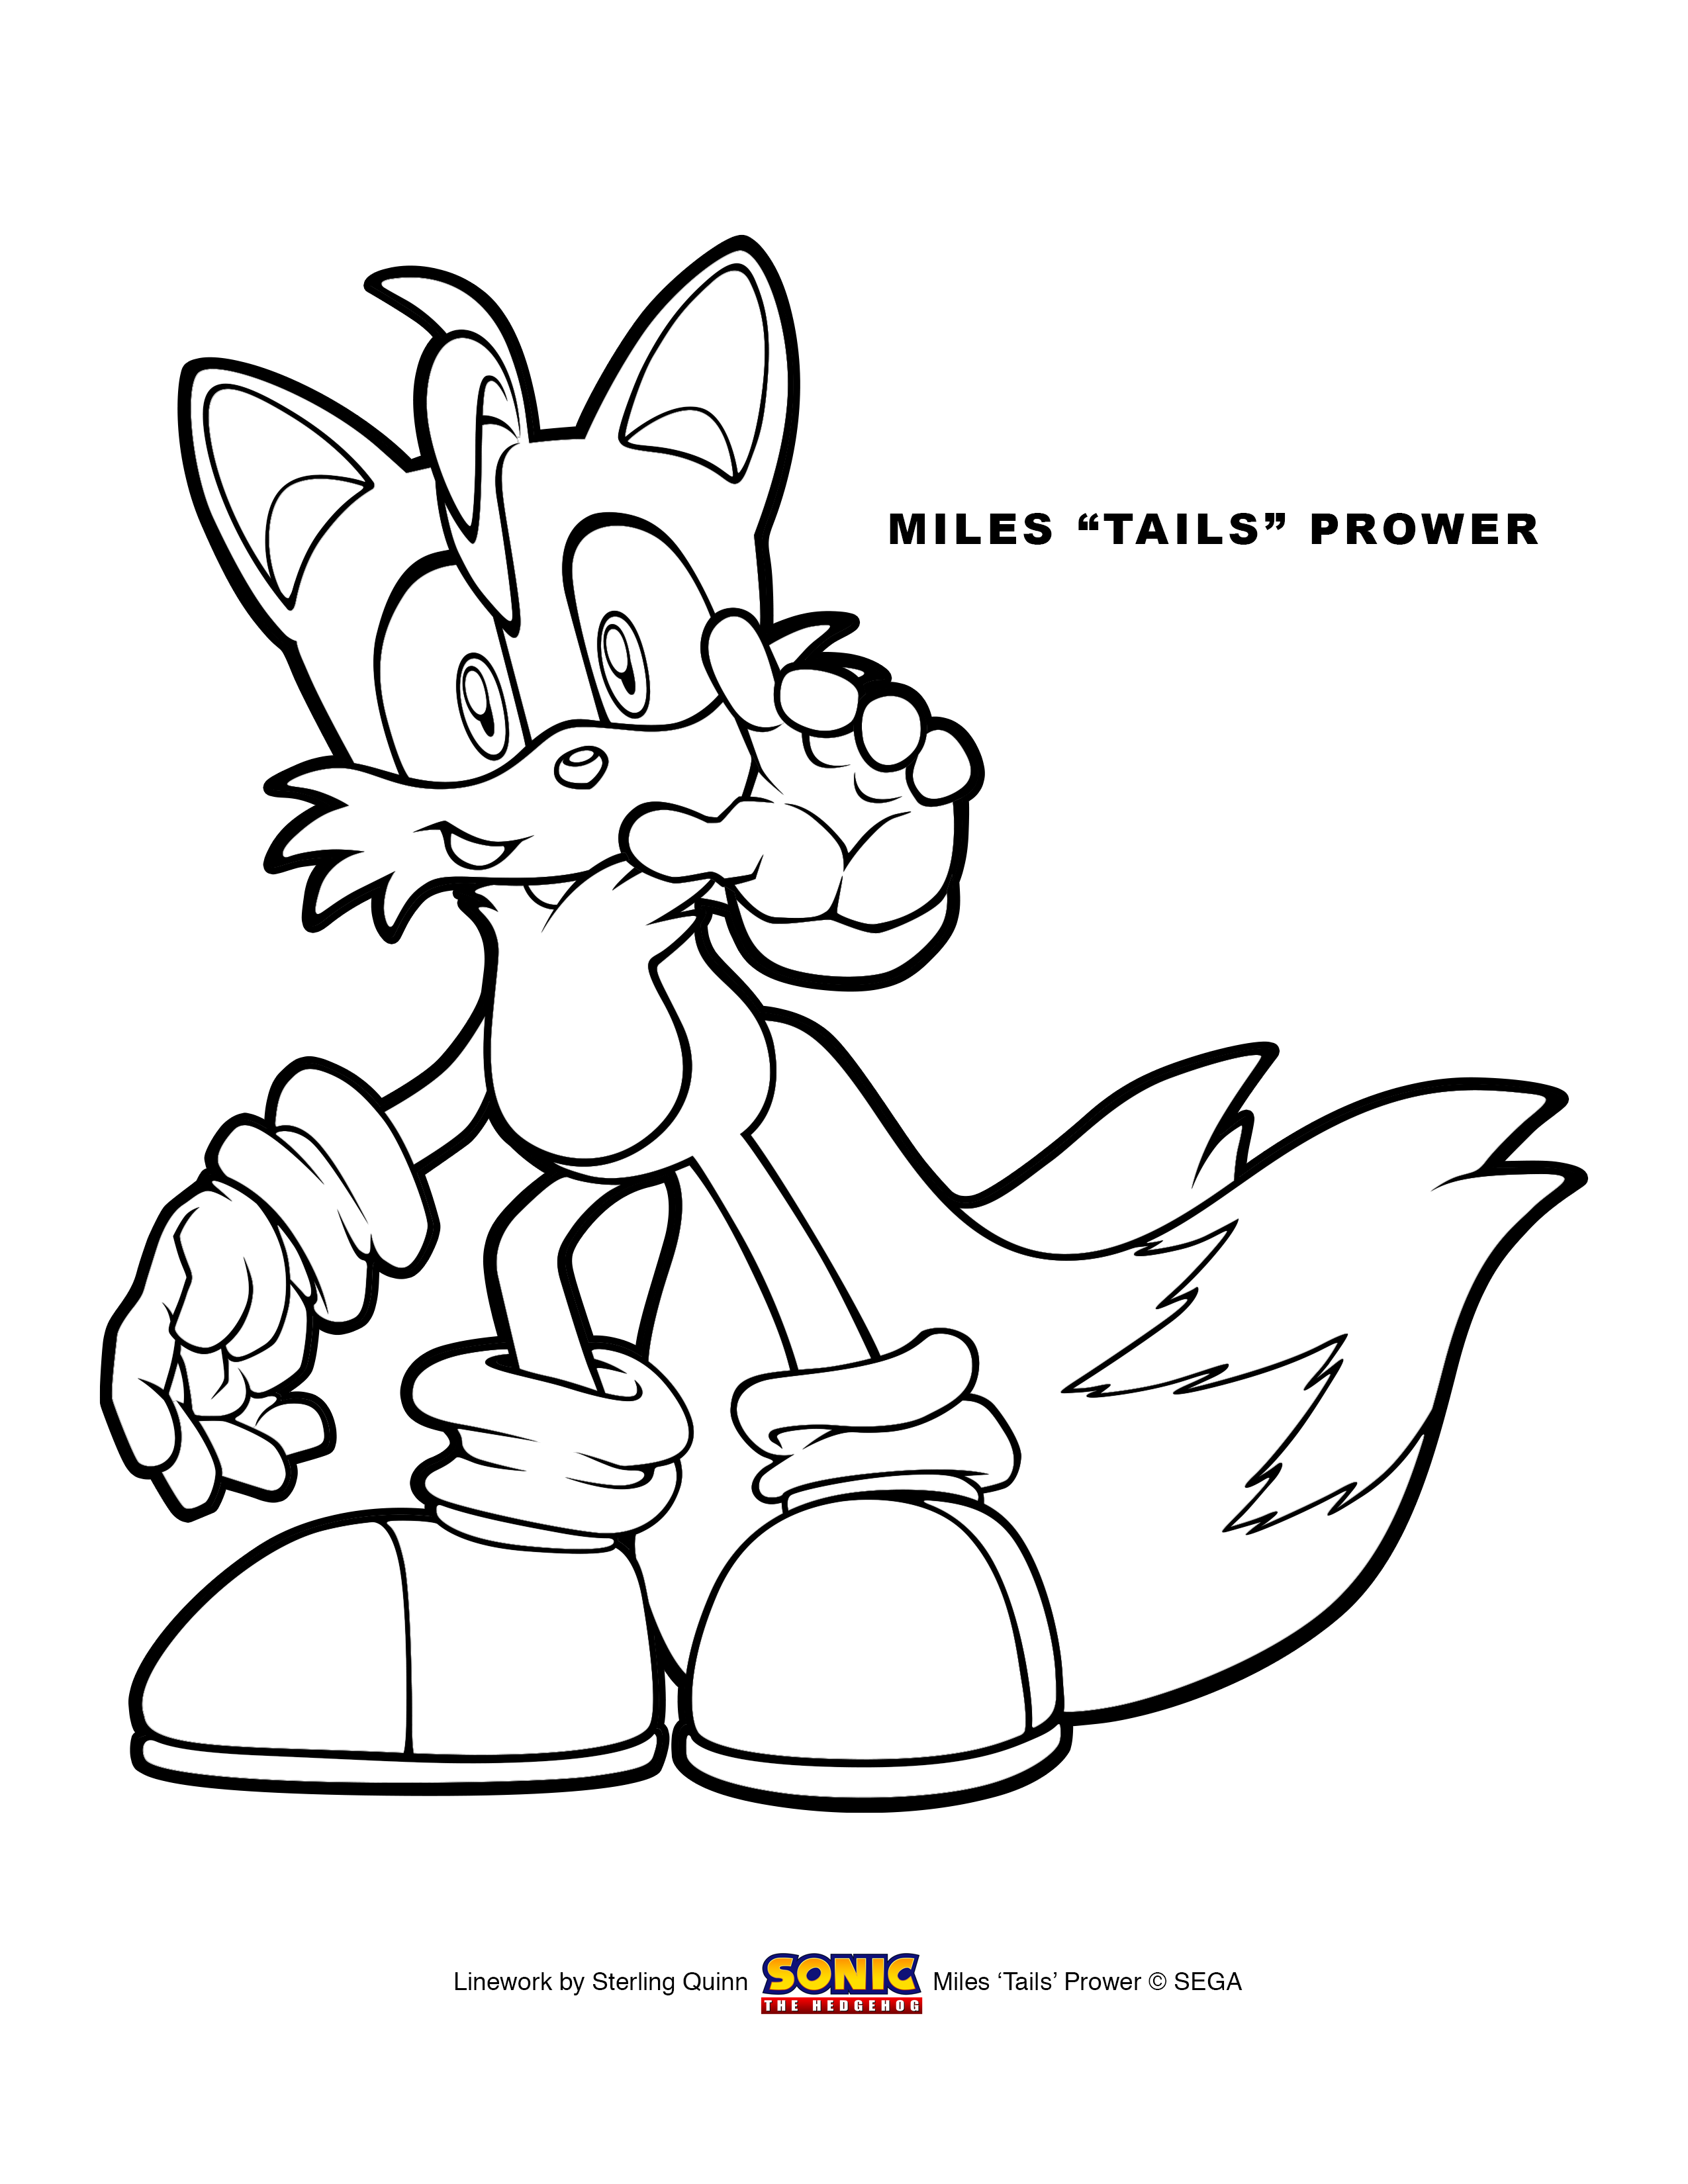 13 Pics of Tails The Fox Coloring Pages - Tails Coloring Pages ...